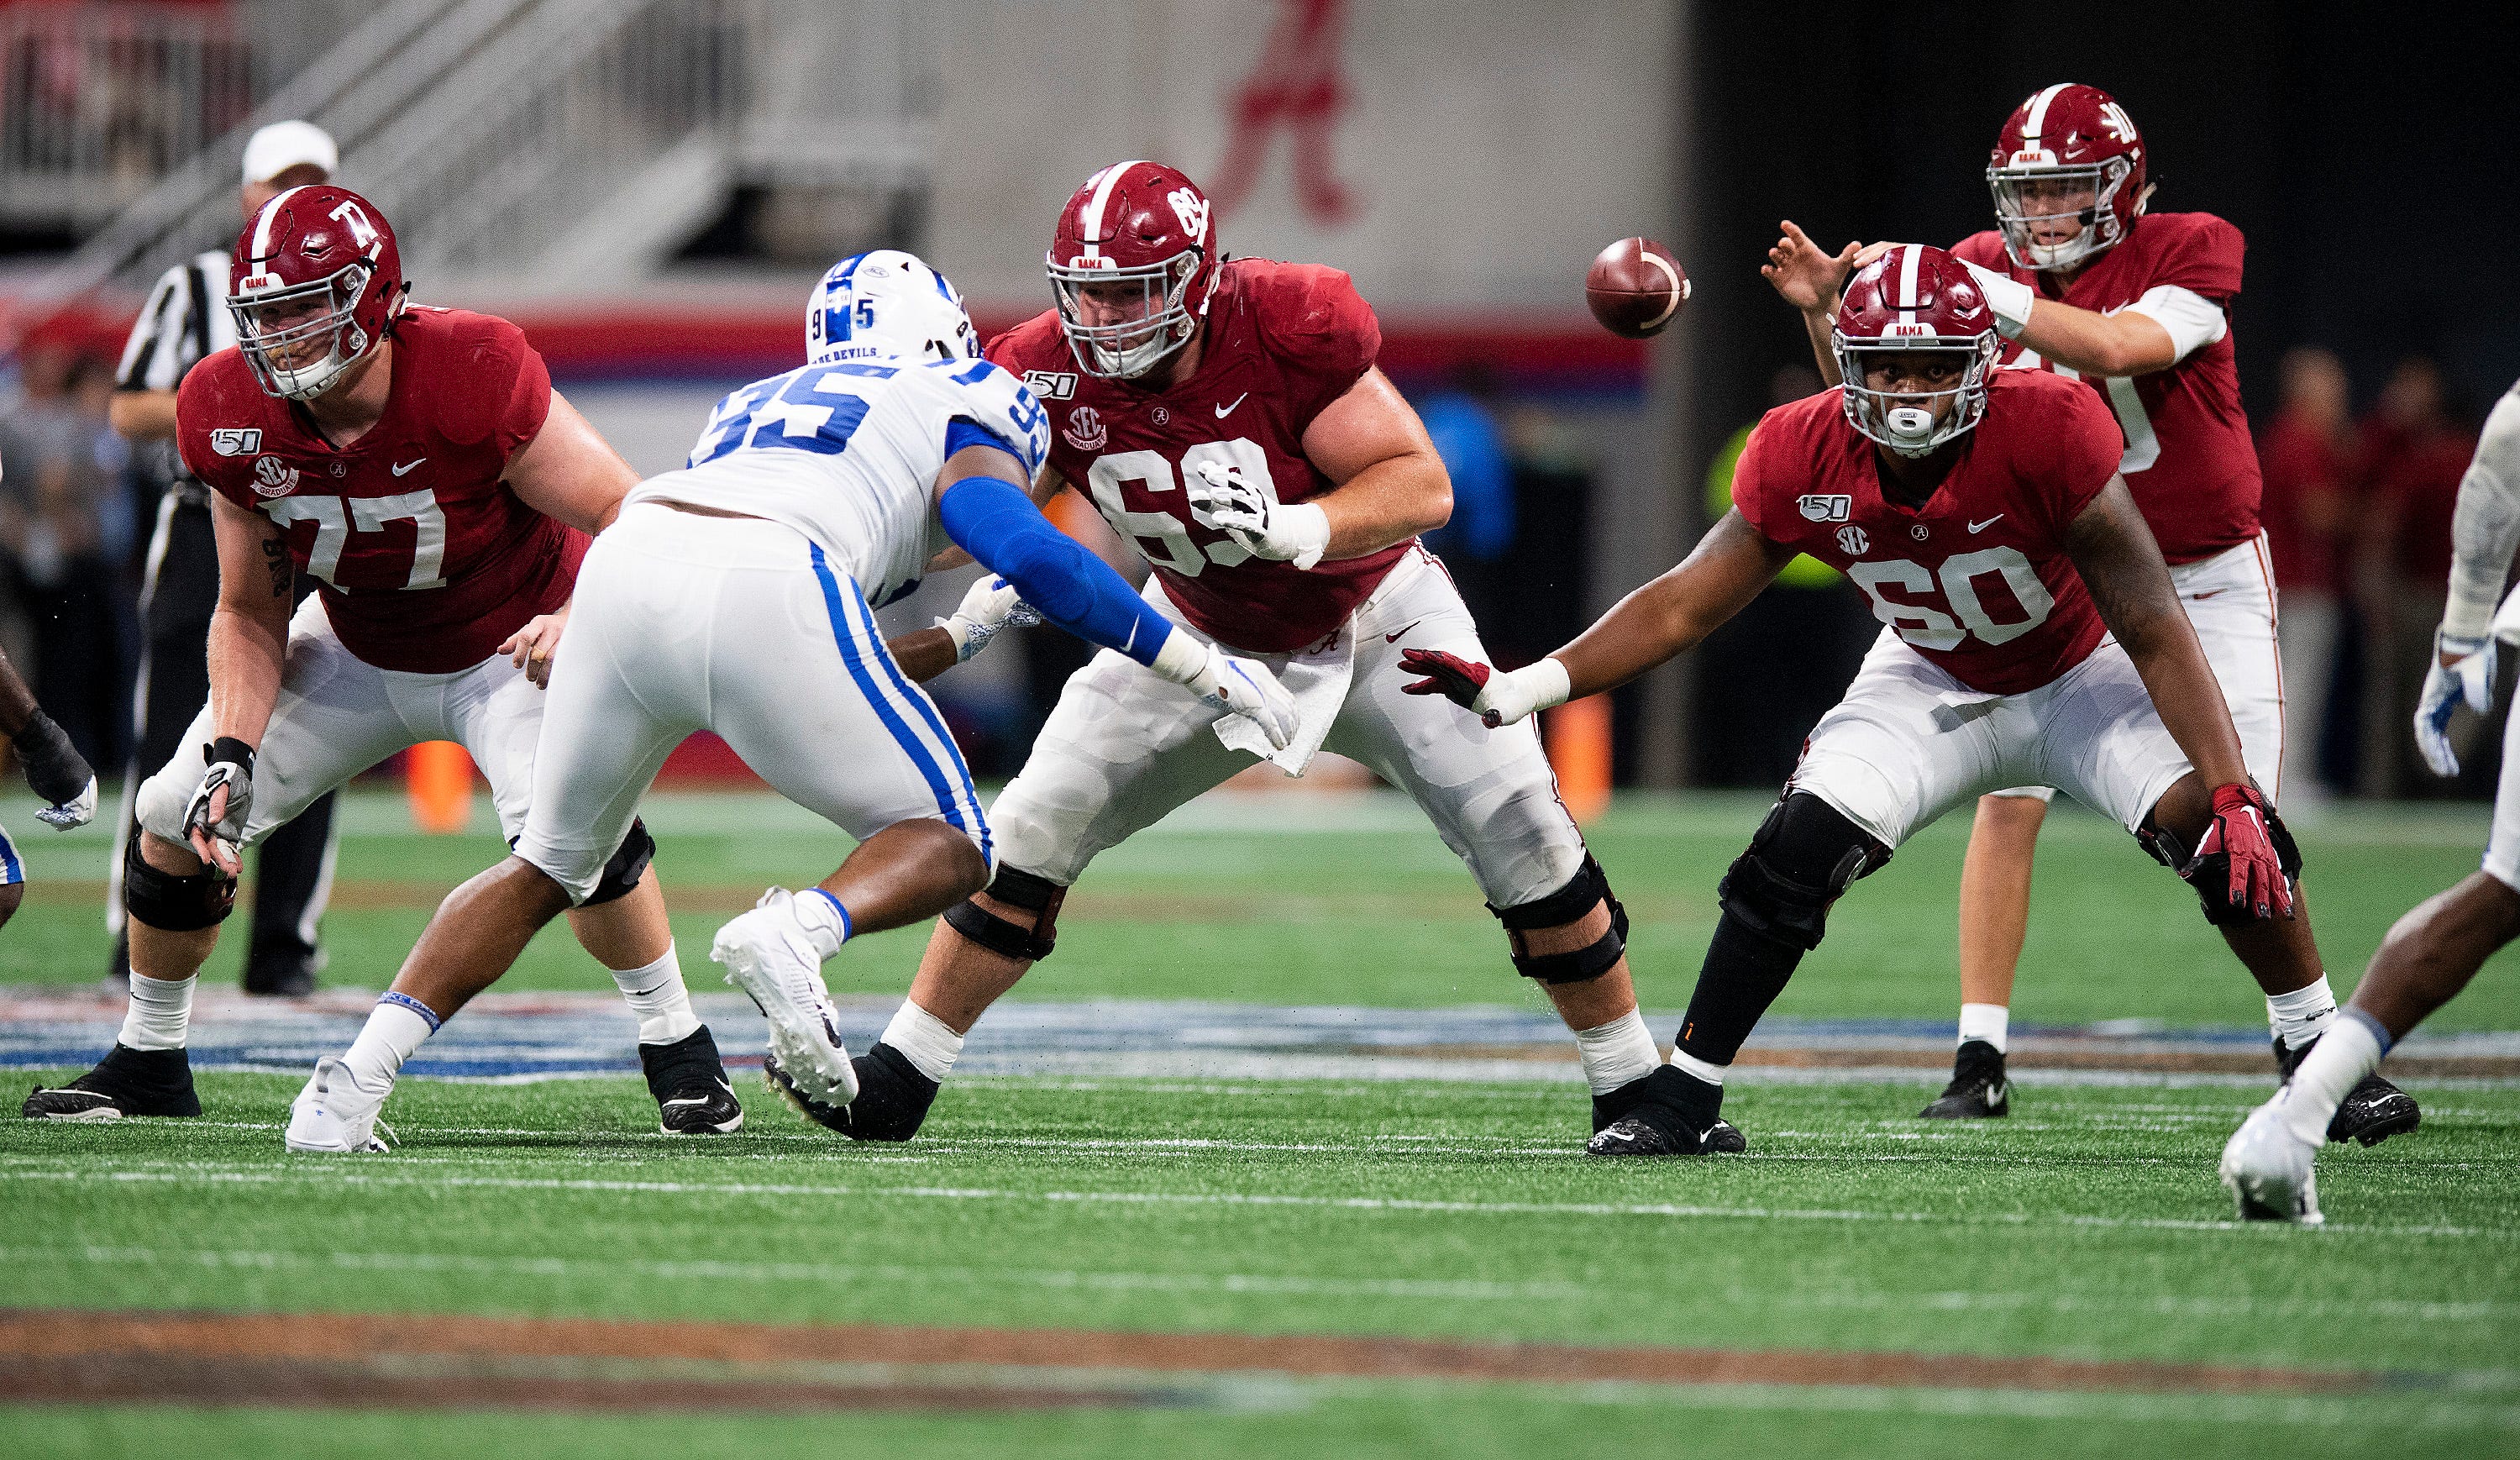 Alabama offensive linemen Matt Womack (77), Landon Dickerson (69) and Kendall Randolph (60) against Duke in the Chick-fil-A Kickoff Game at Mercedes Benz Stadium in Atlanta, Ga., on Saturday August 31, 2019.